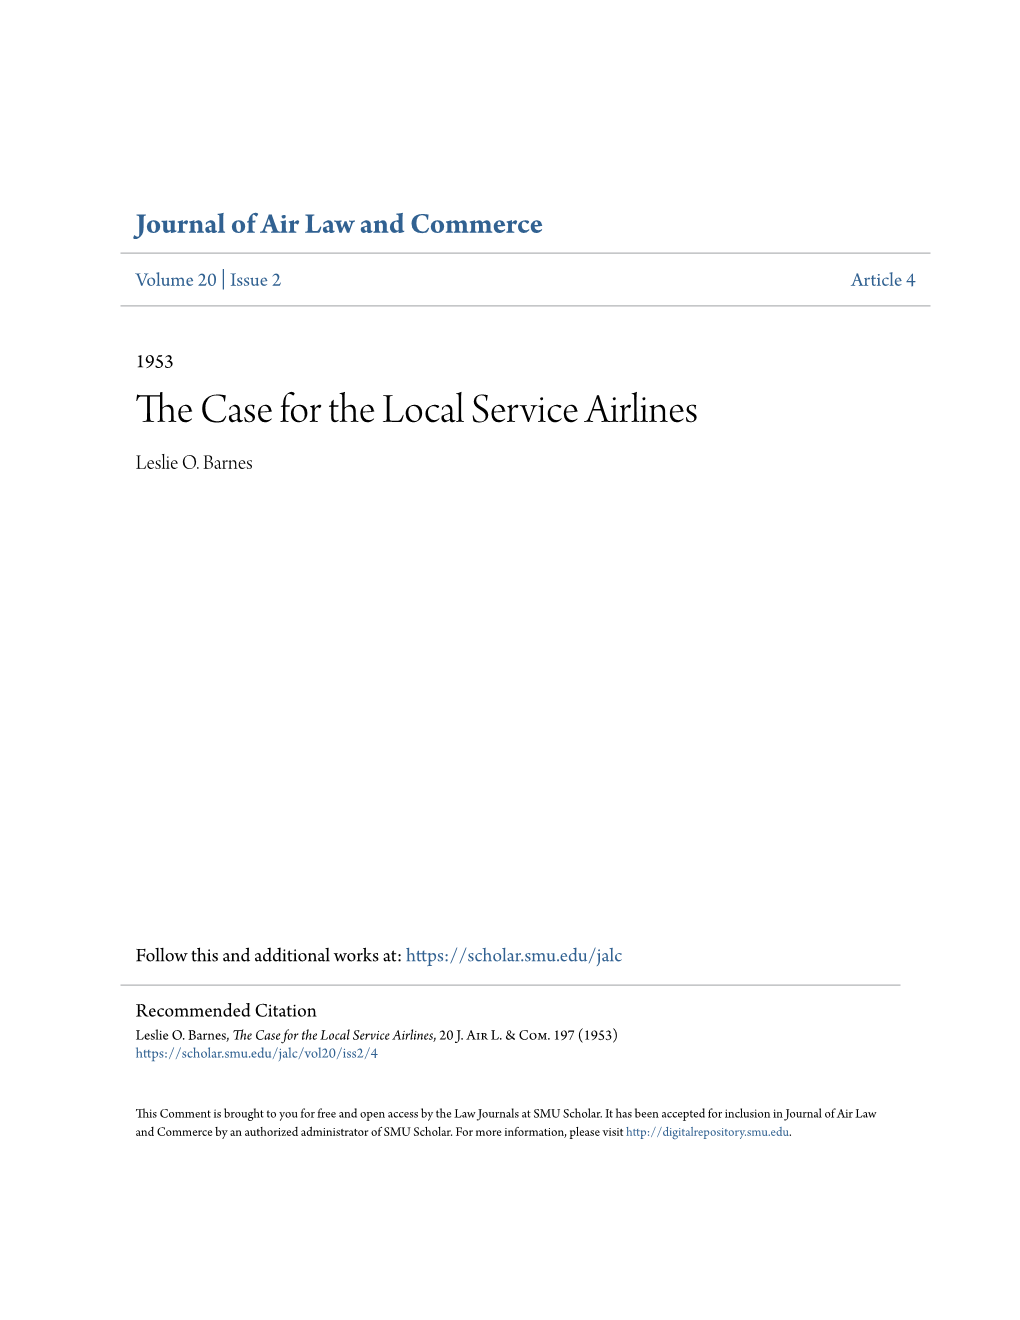 The Case for the Local Service Airlines, 20 J